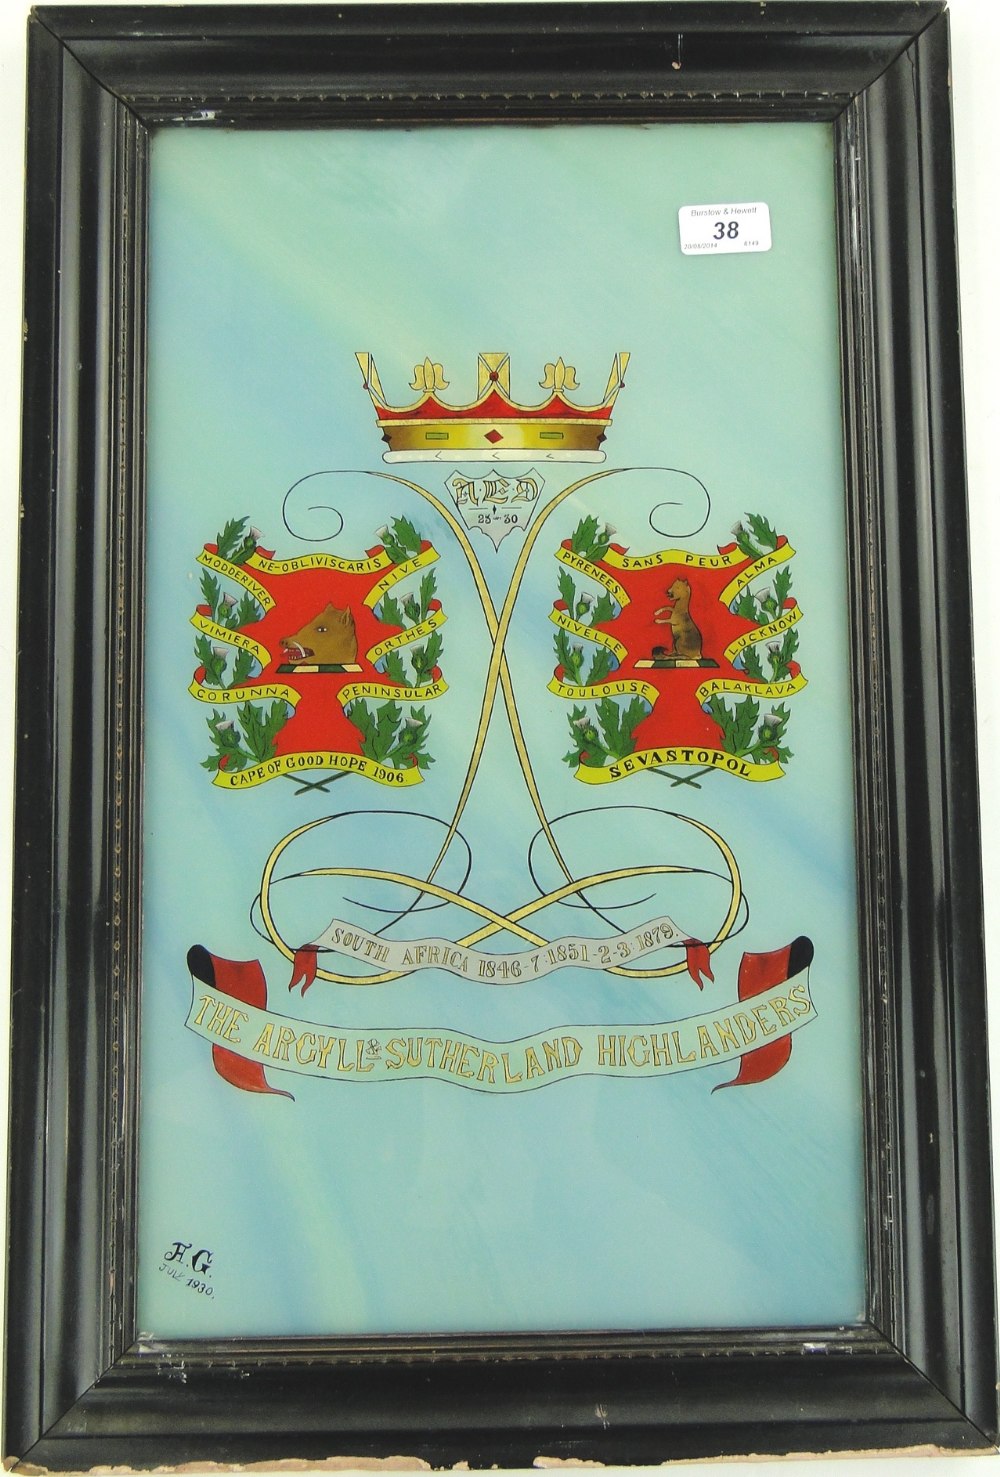 A reverse painting behind glass depicting the Argyll and Southerland Highlanders Coat of Arms,